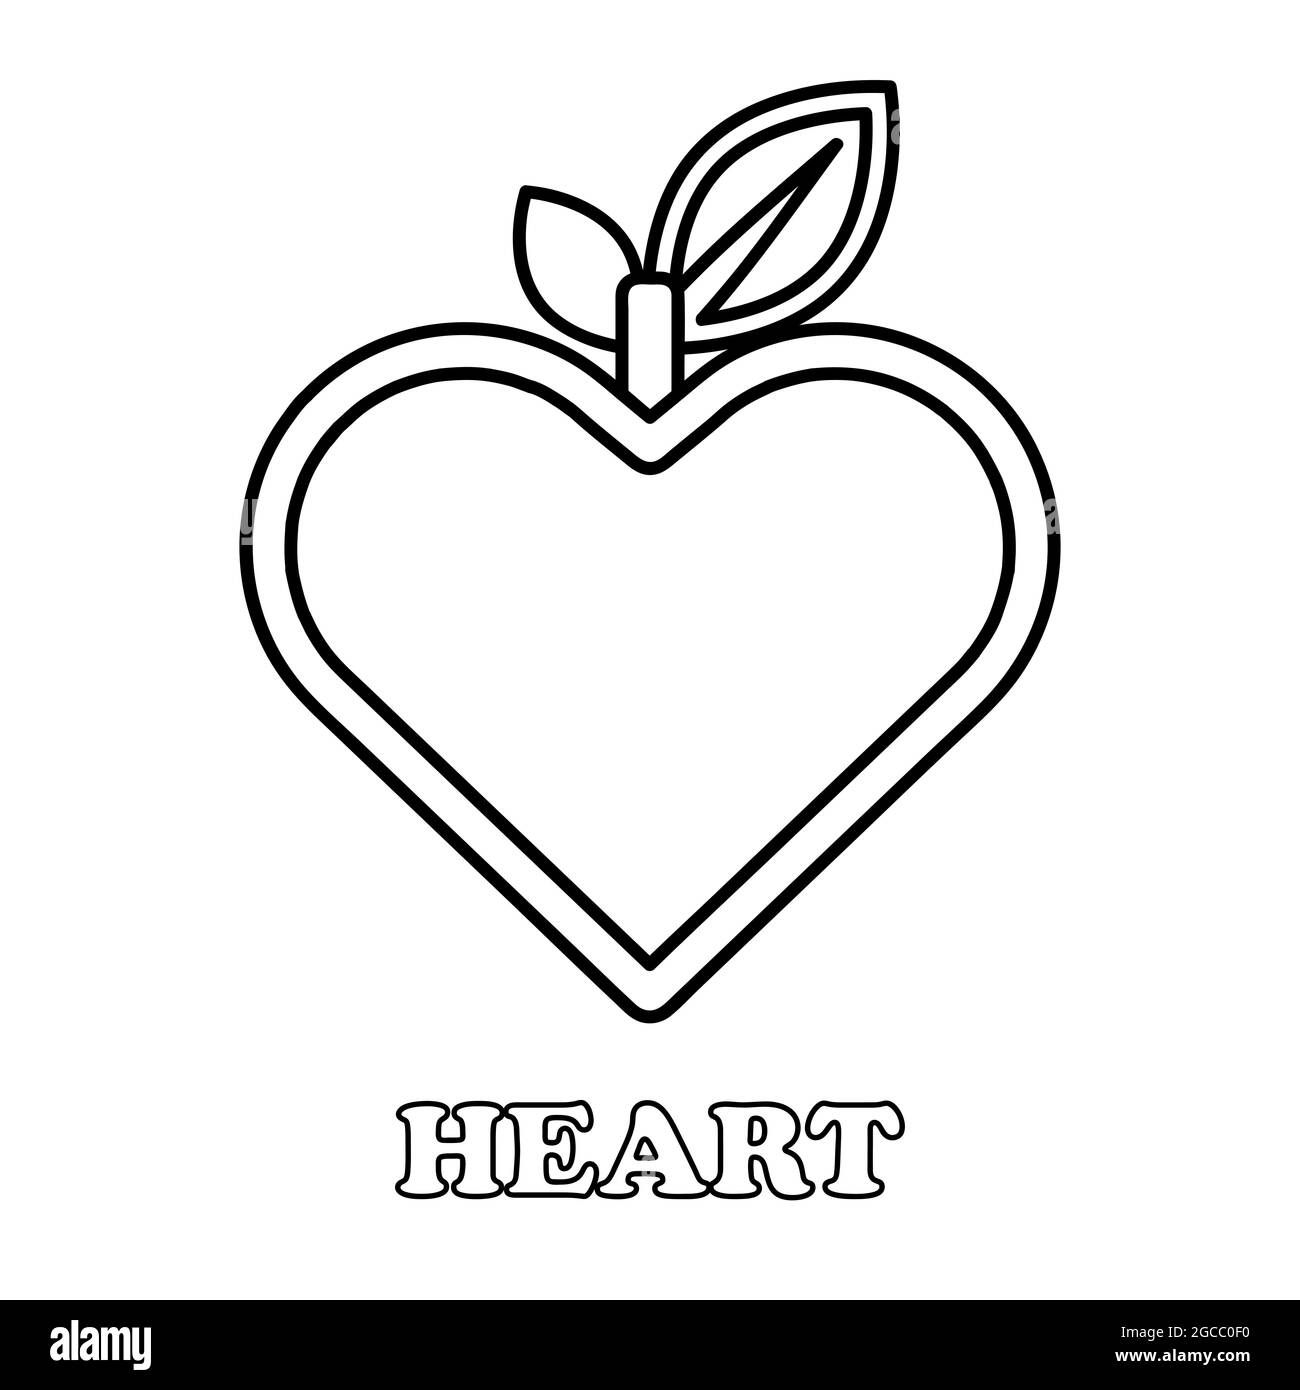 heart with leaf coloring page. coloring page for children. on white background Stock Photo